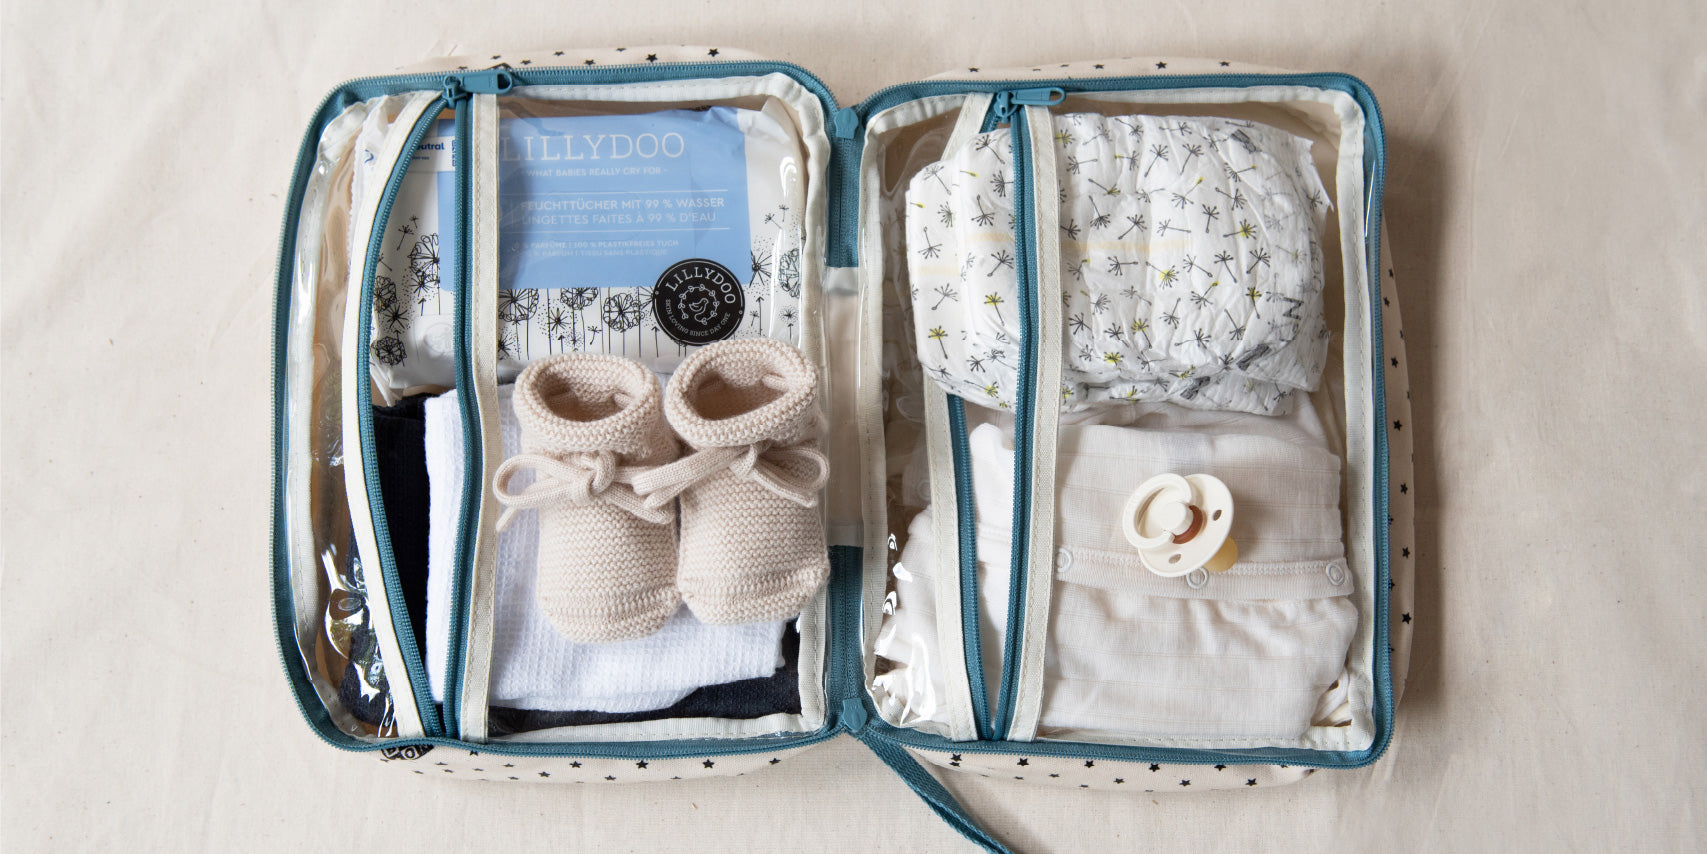 Everything you need when packing your Hospital Bag